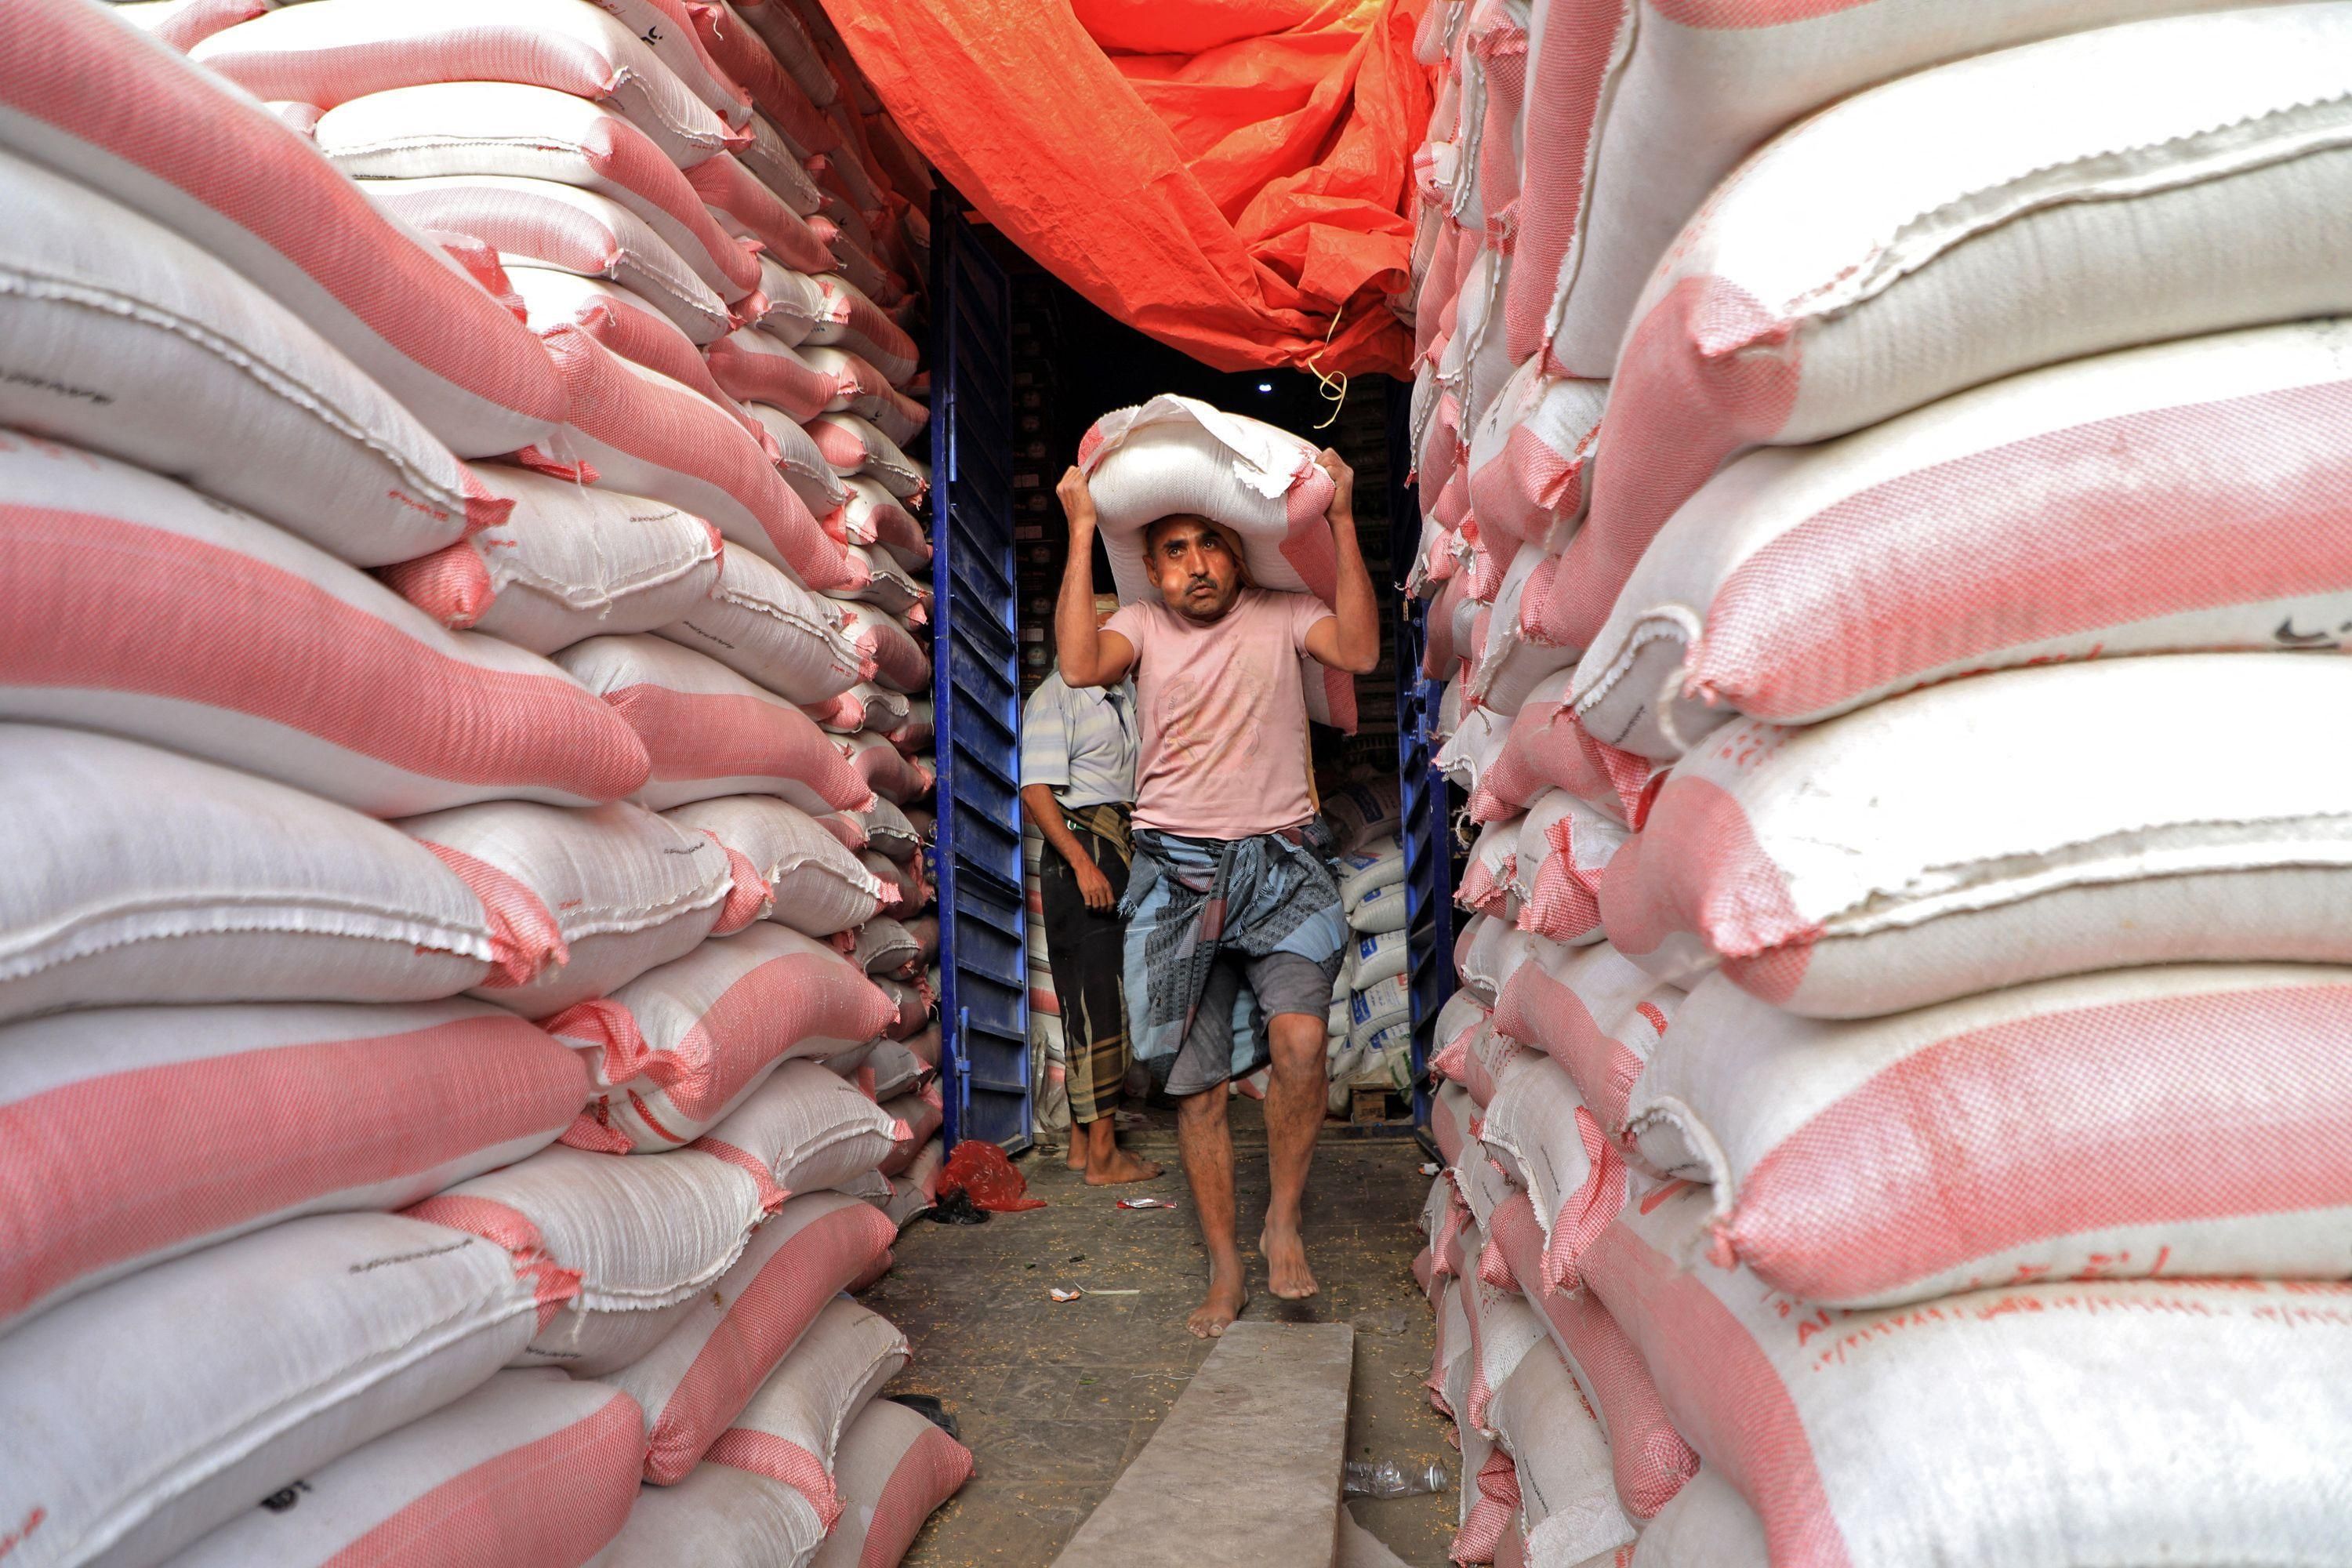 Yemeni workers carry bags of flour at a bakery in the capital Sanaa, on March 27, 2022. With the country almost completely dependent on imports, aid groups say the situation will only worsen following Russia's invasion of Ukraine, which produces nearly a third of Yemen's wheat supplies. (Photo: Mohammed Huwais/AFP via Getty Images)